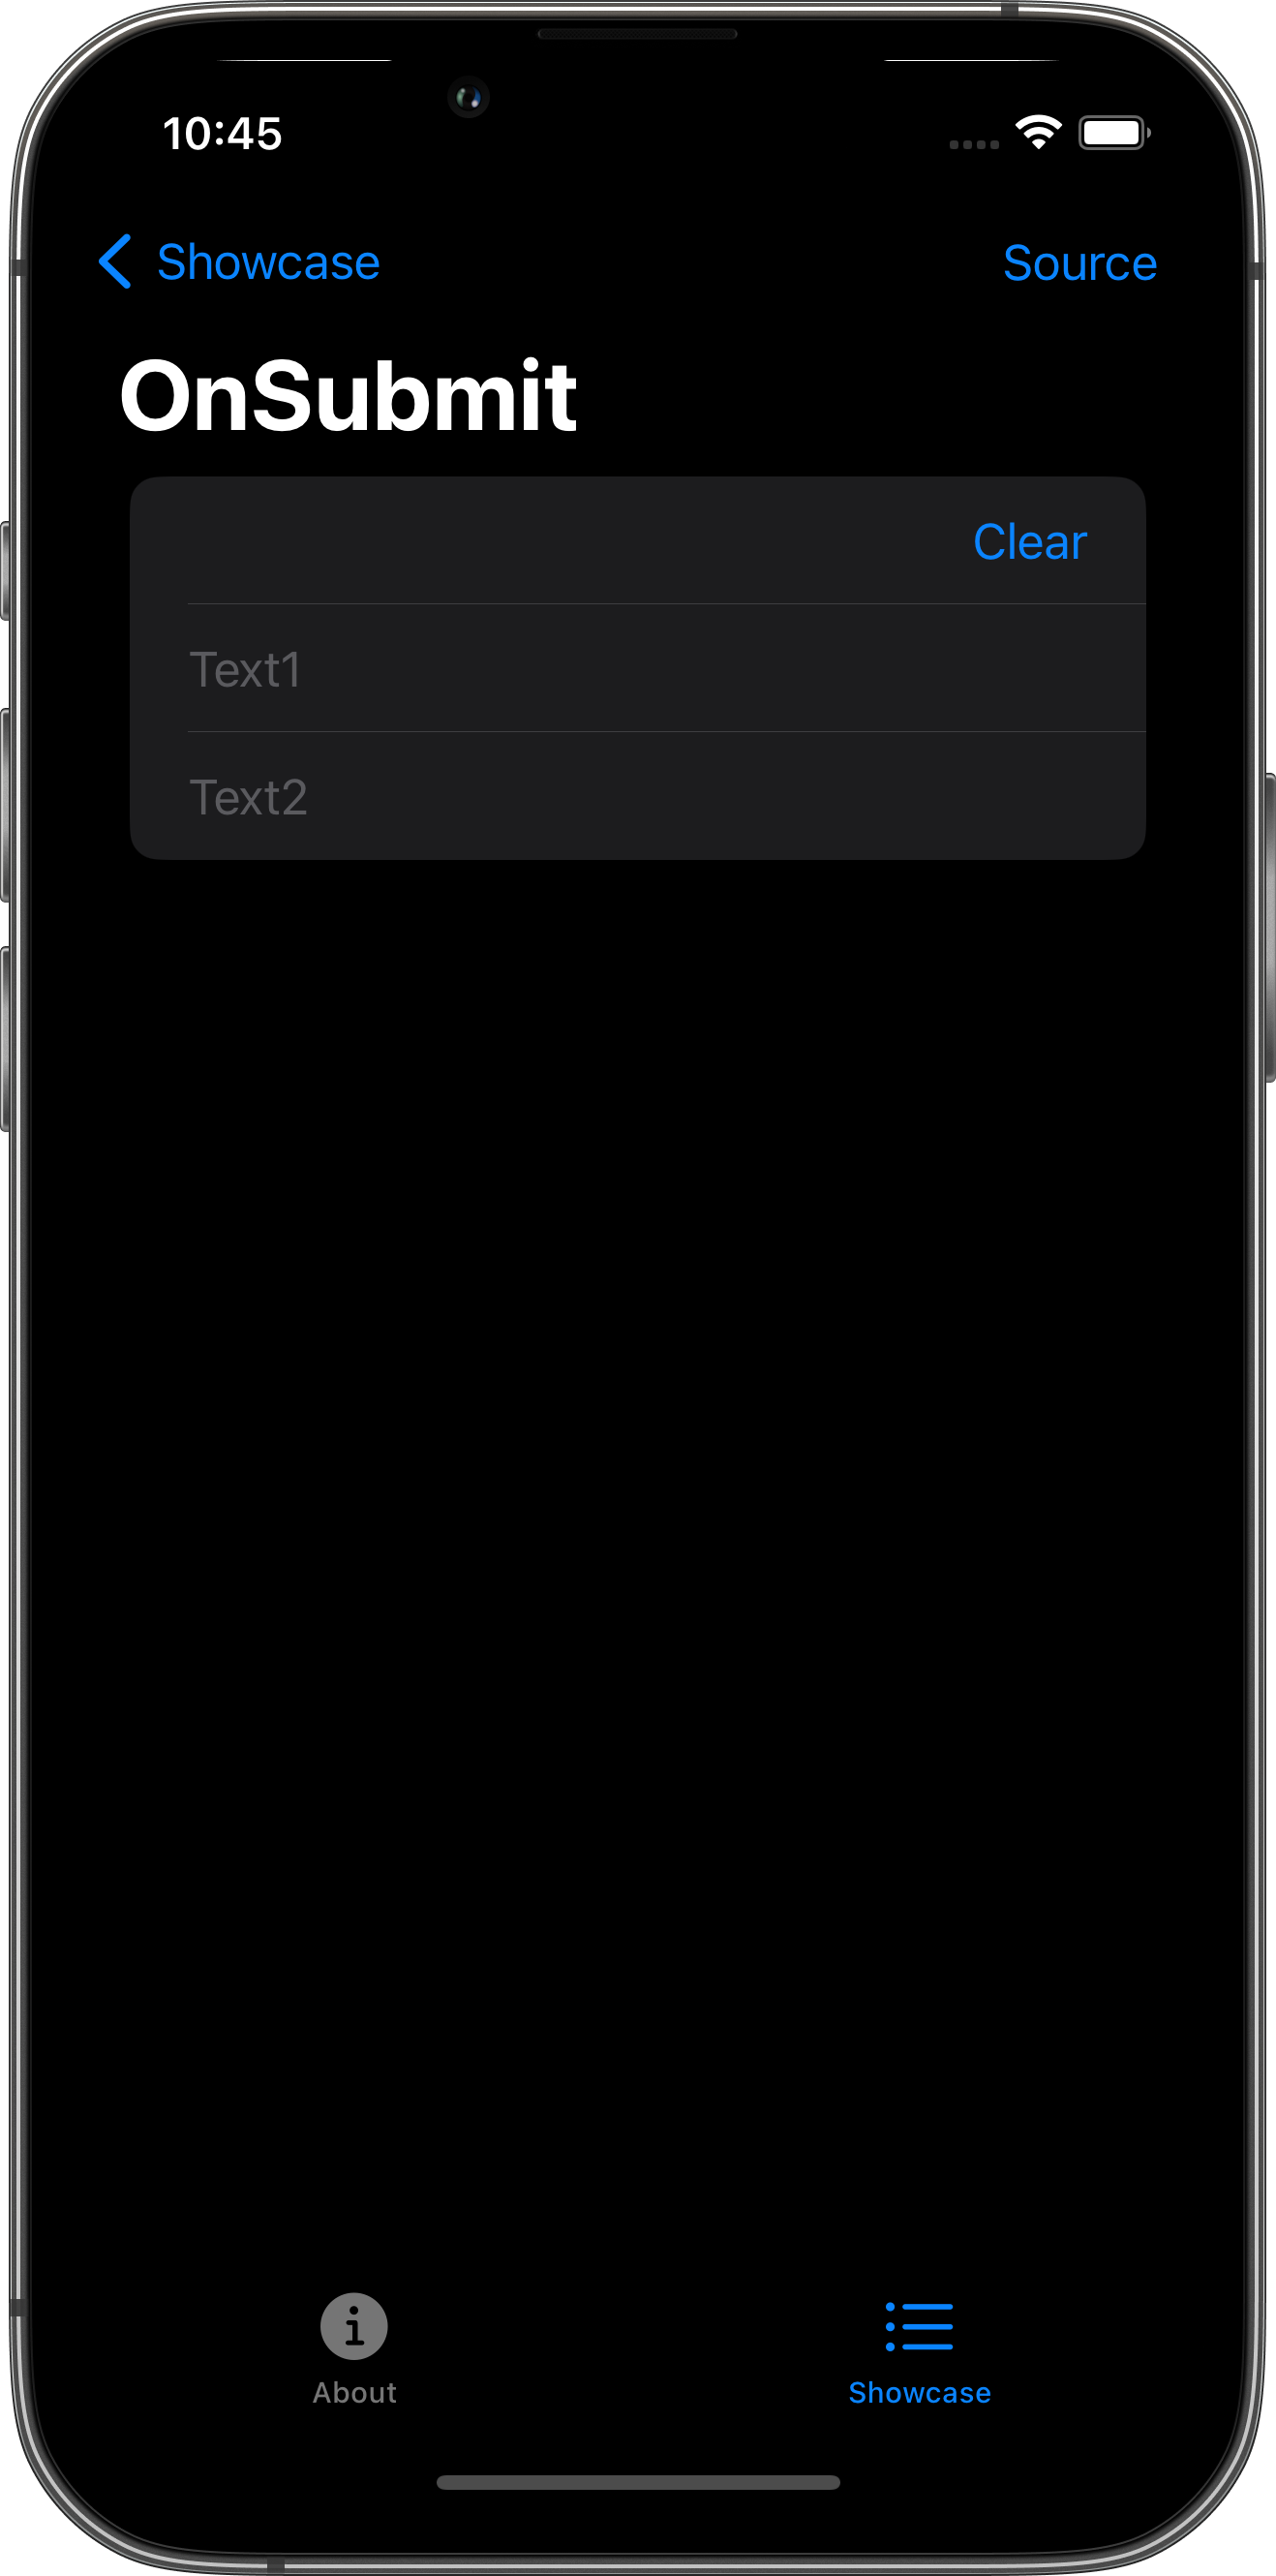 iPhone screenshot for OnSubmit component (dark mode)